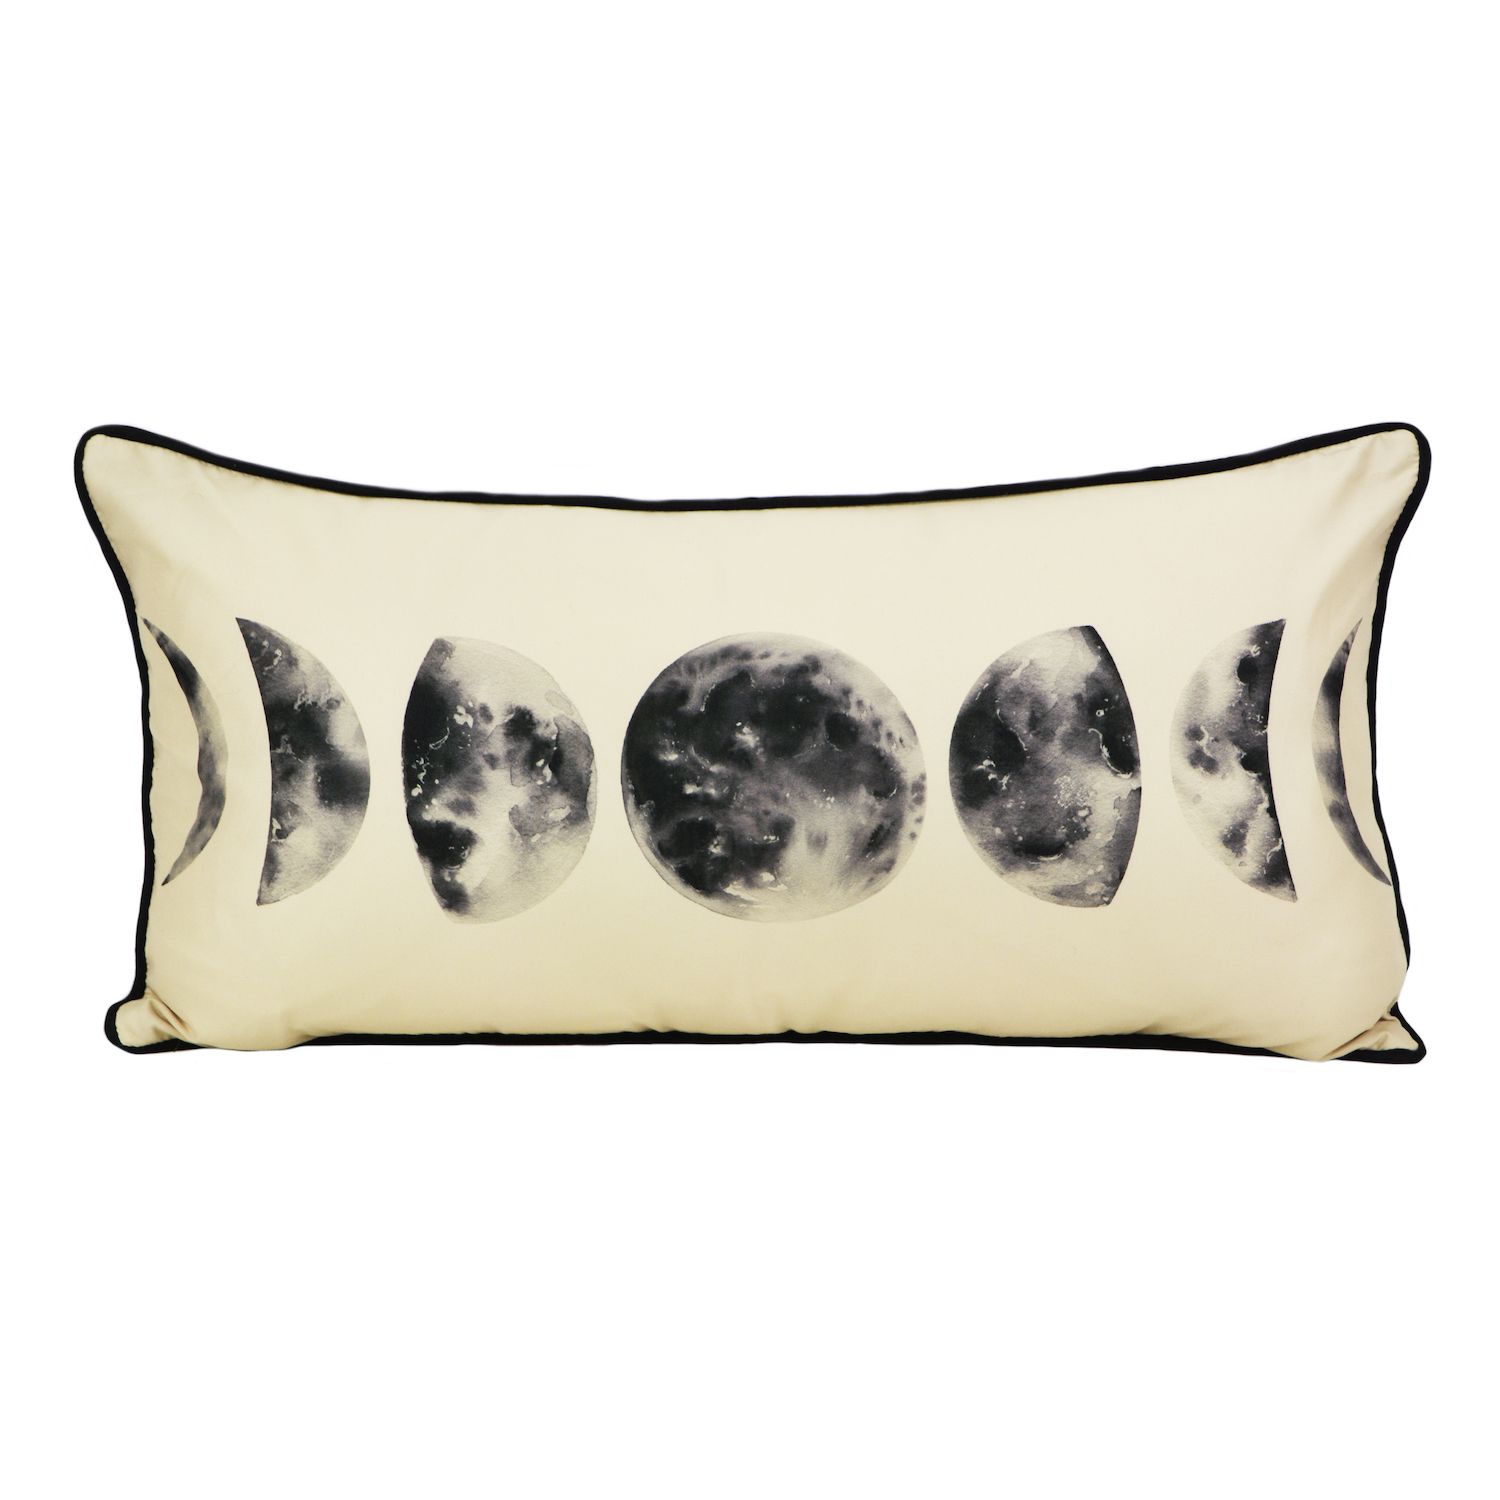 Image for Donna Sharp Dona Sharp Moon Forest Symbols Decorative Pillow at Kohl's.